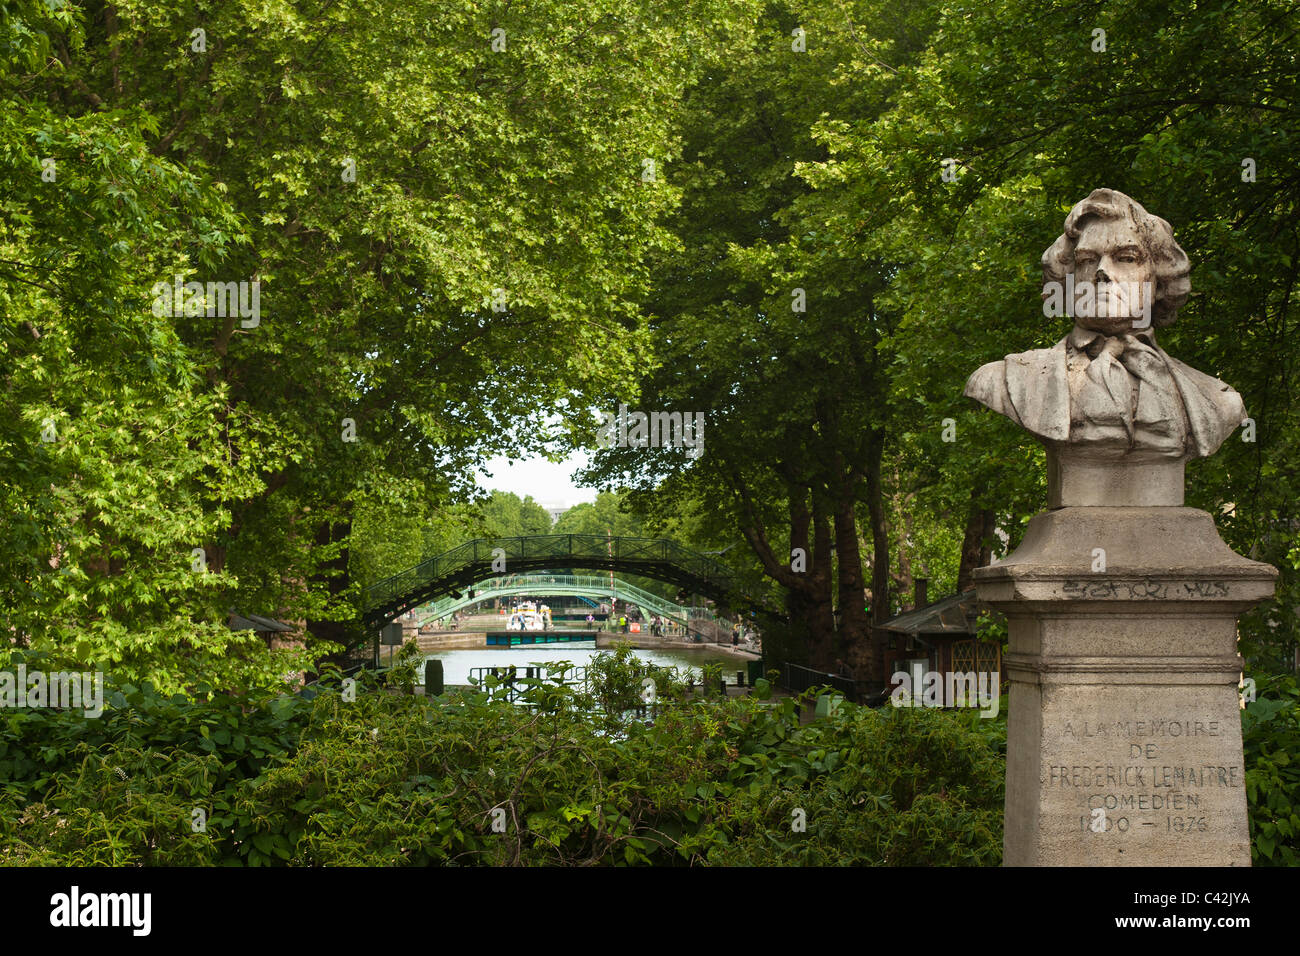 PARIS, FRANCE - MAY 08, 2011:  Bust of Frederick Lemaitre in the Square named in his honour with the Canal St-Martin in the background, Stock Photo